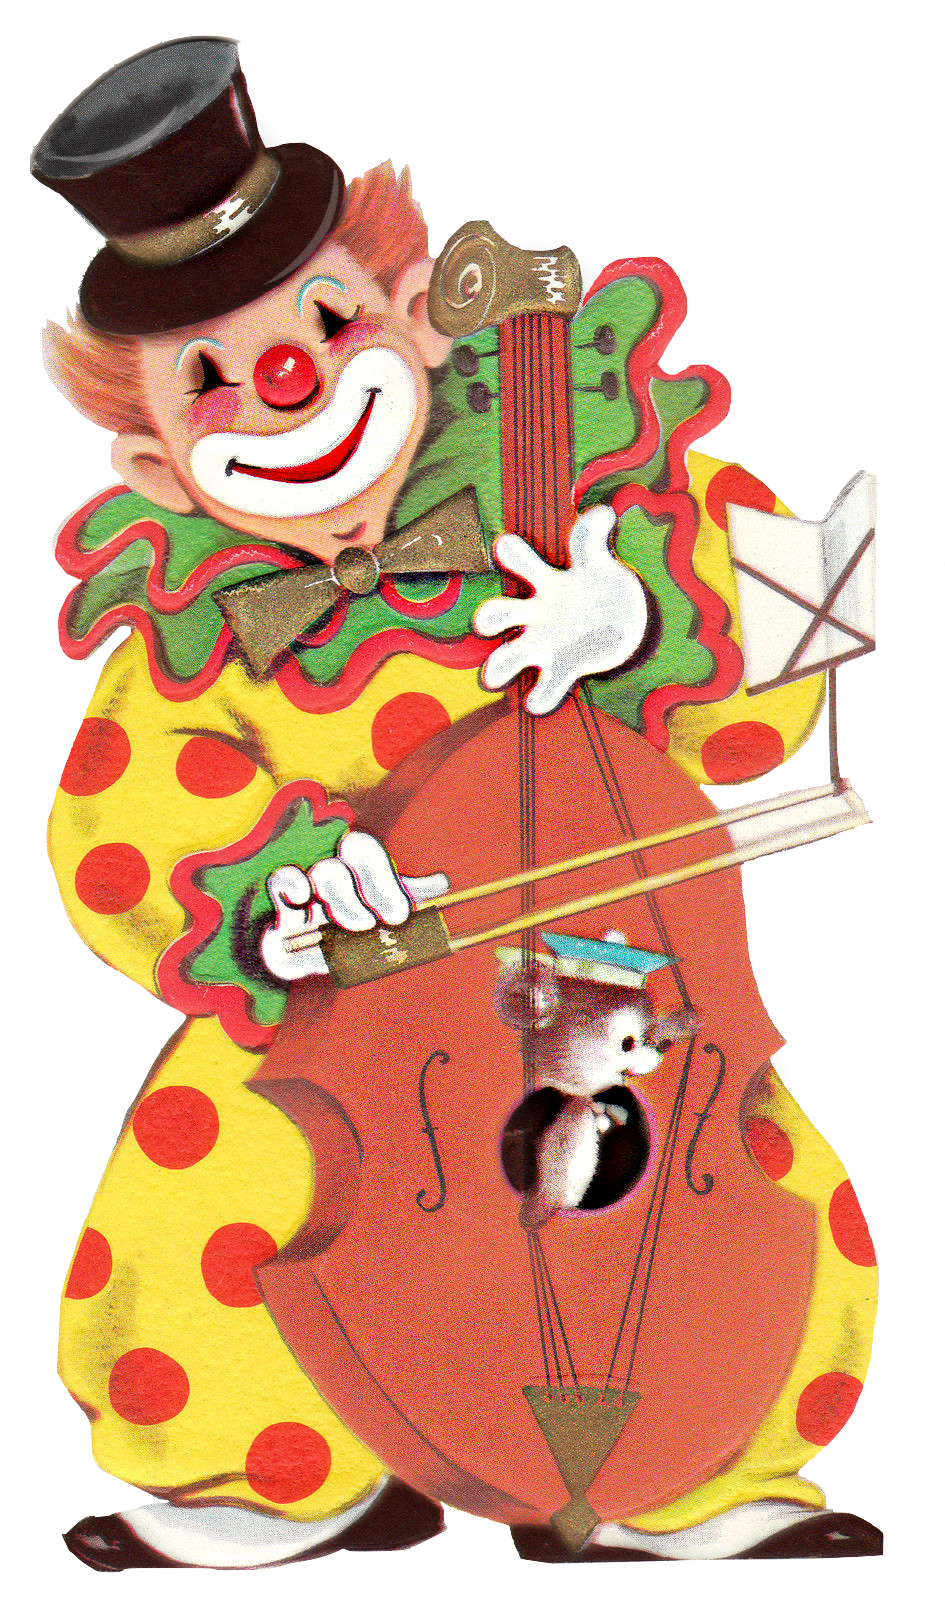 Clown Playing the Cello